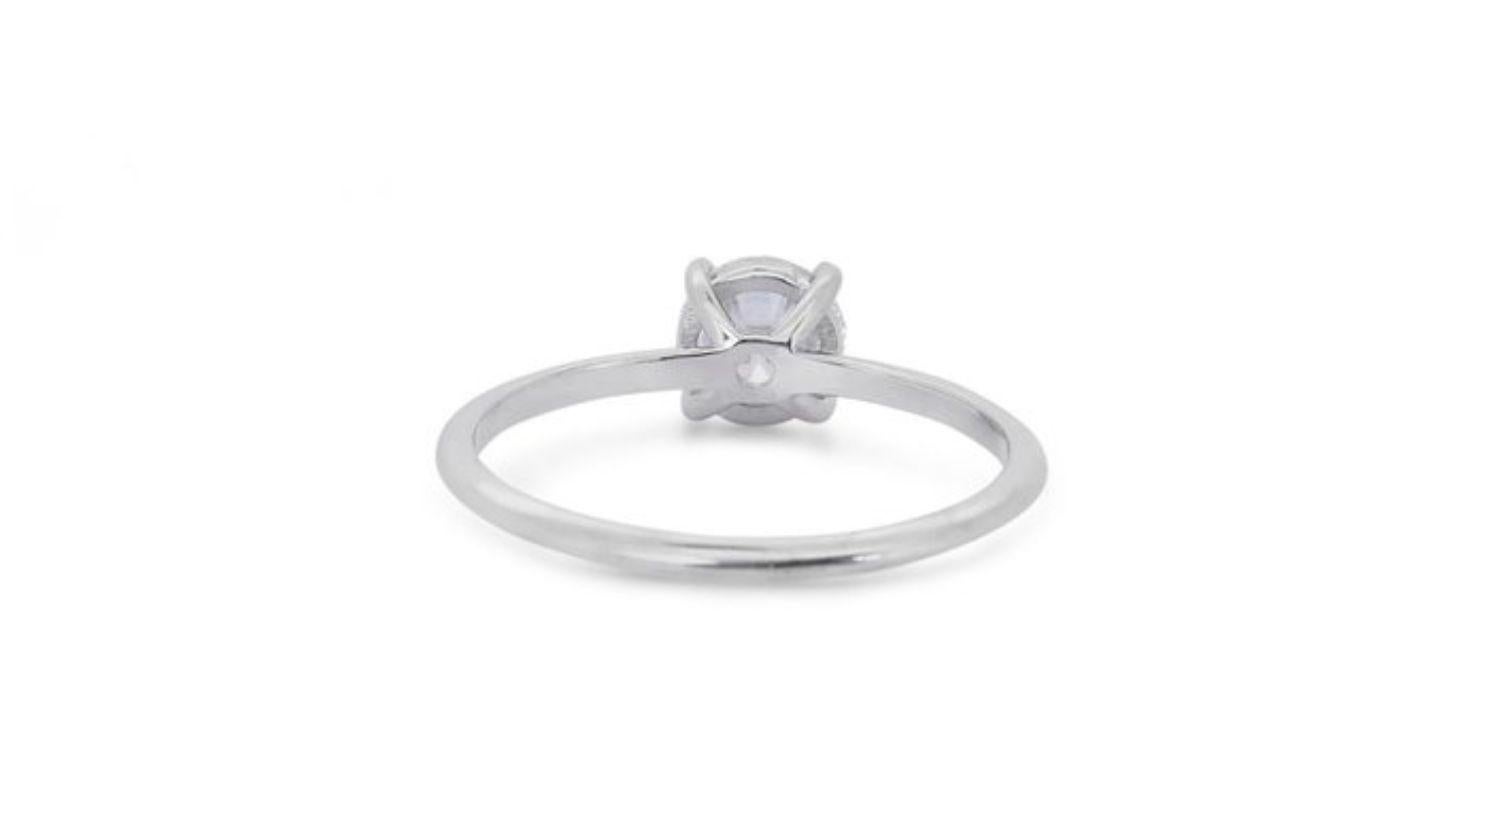 Timeless 0.71 carat Round Brilliant Diamond Ring in 18K White Gold For Sale 1